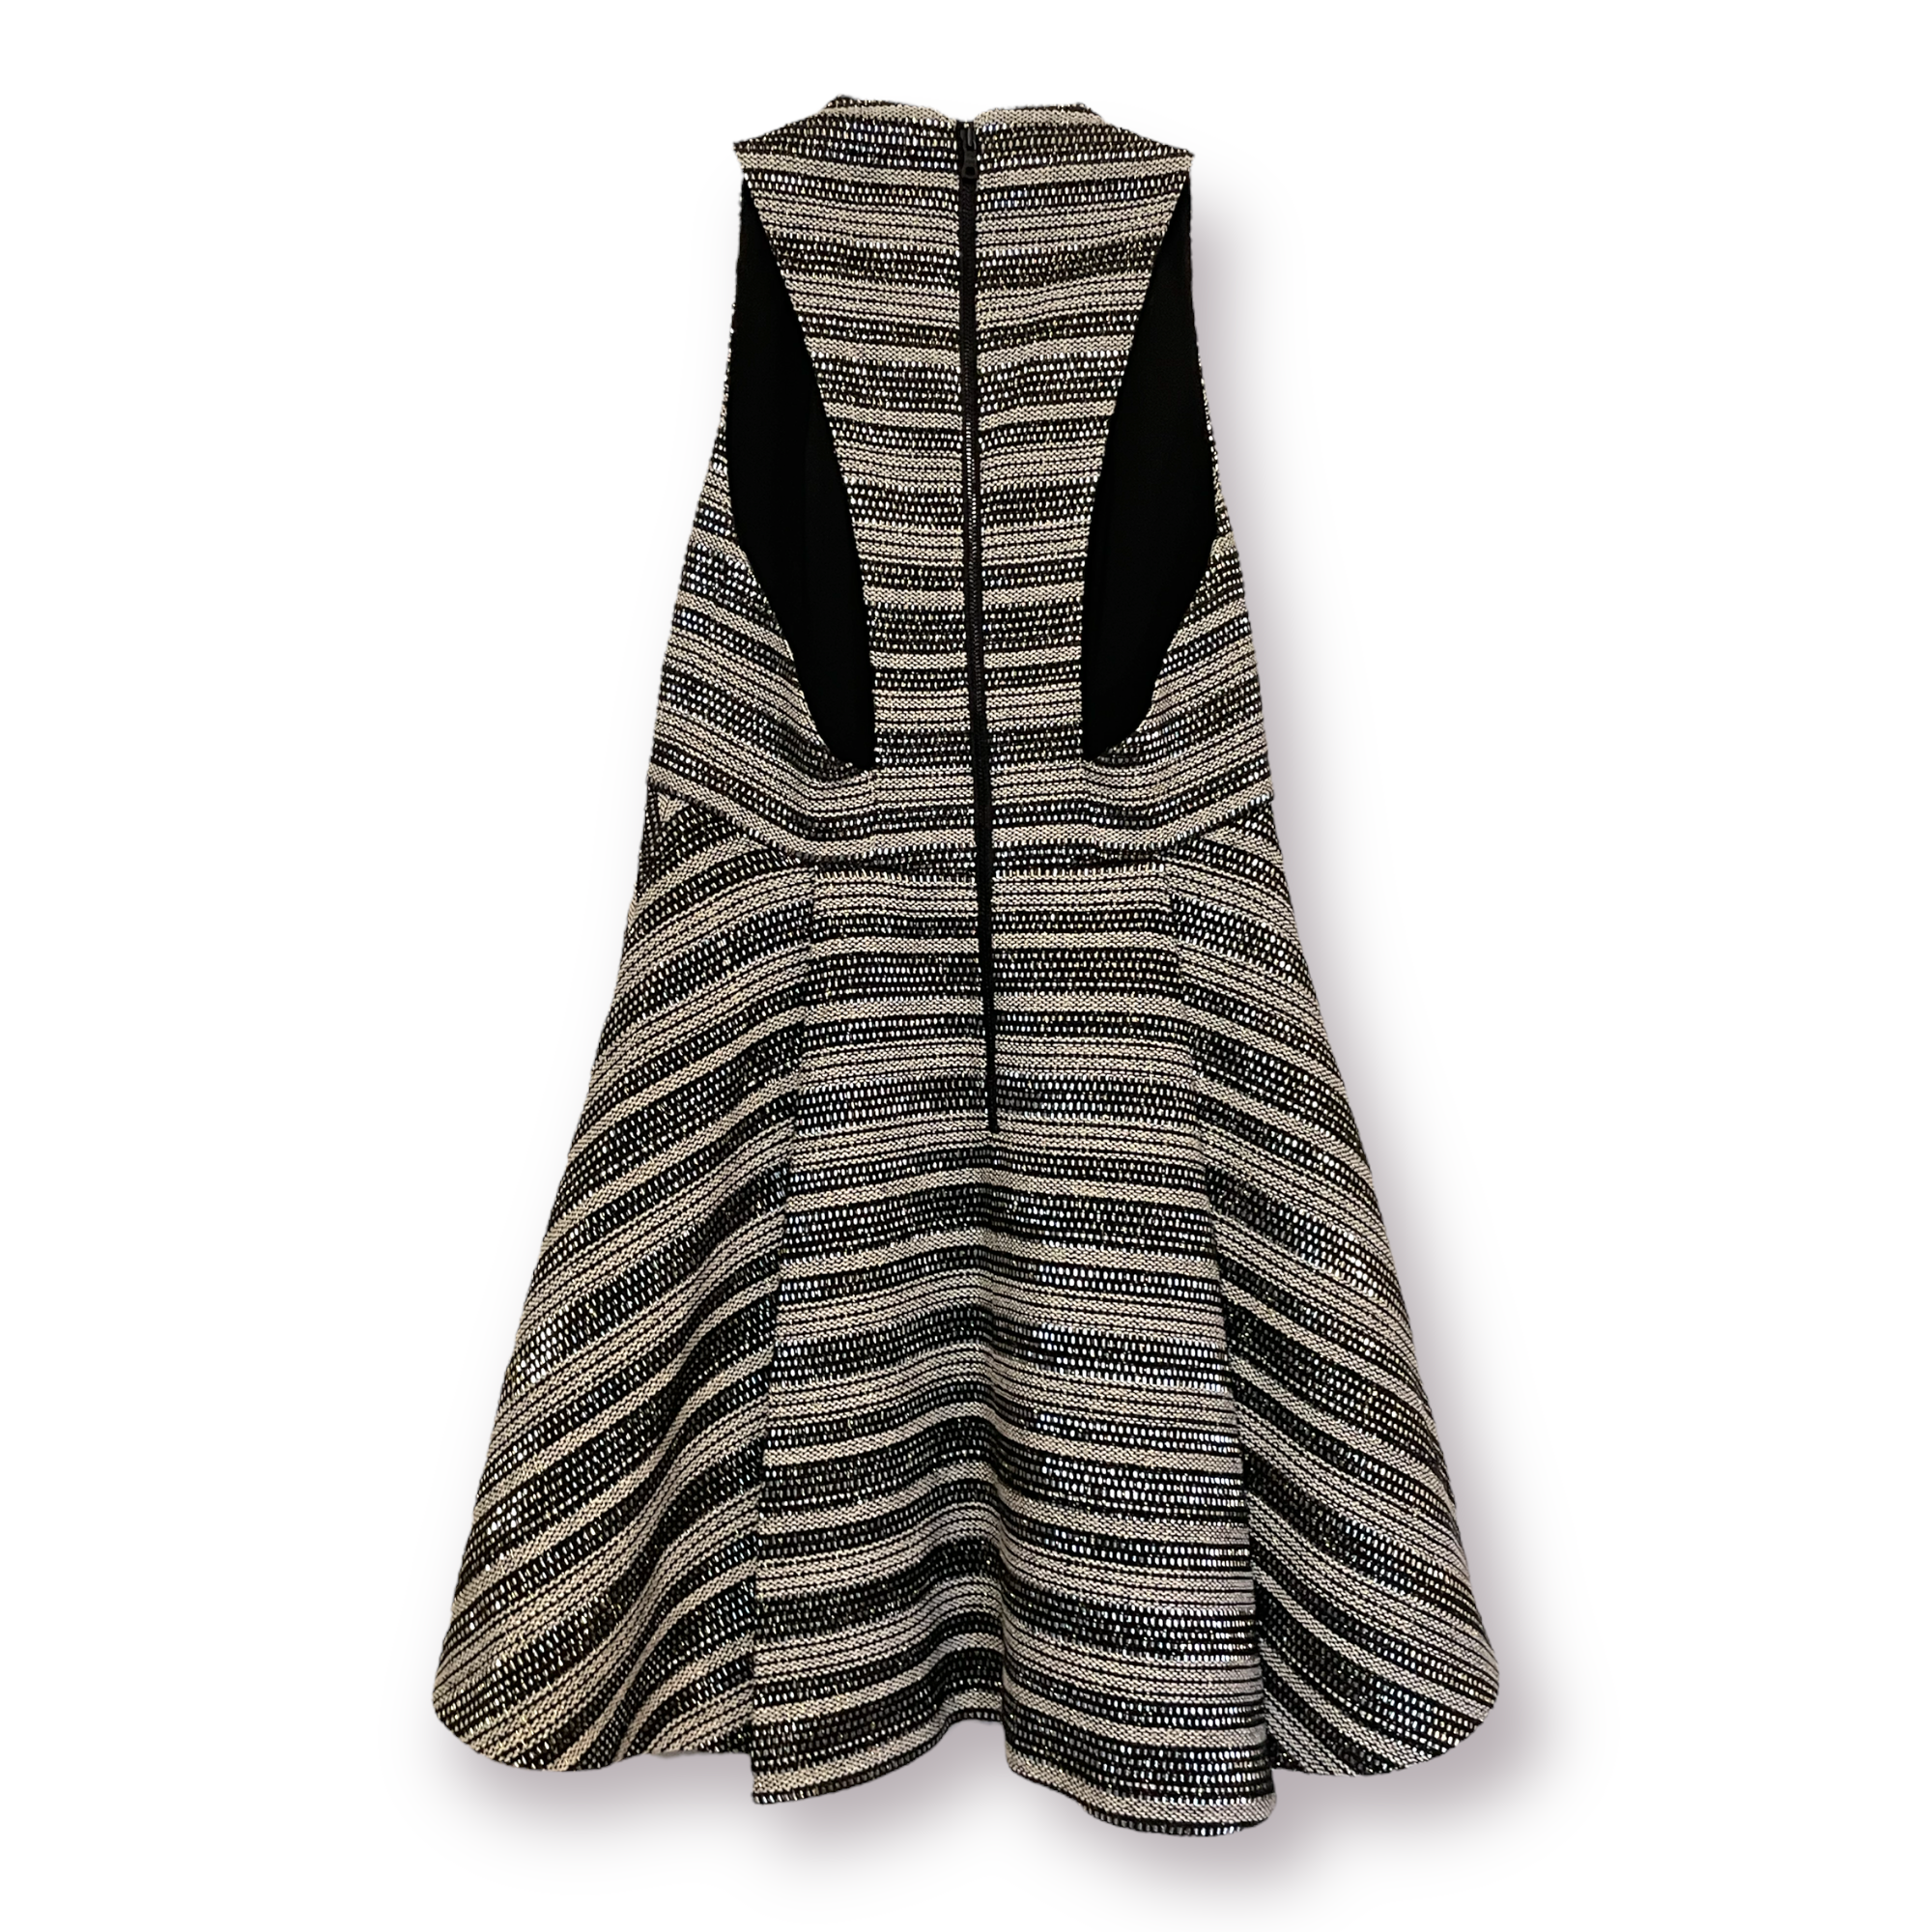 Alice + Olivia Patterned Dress with GORGEOUS Pleats & Cutout Side/Back |Size: 6|